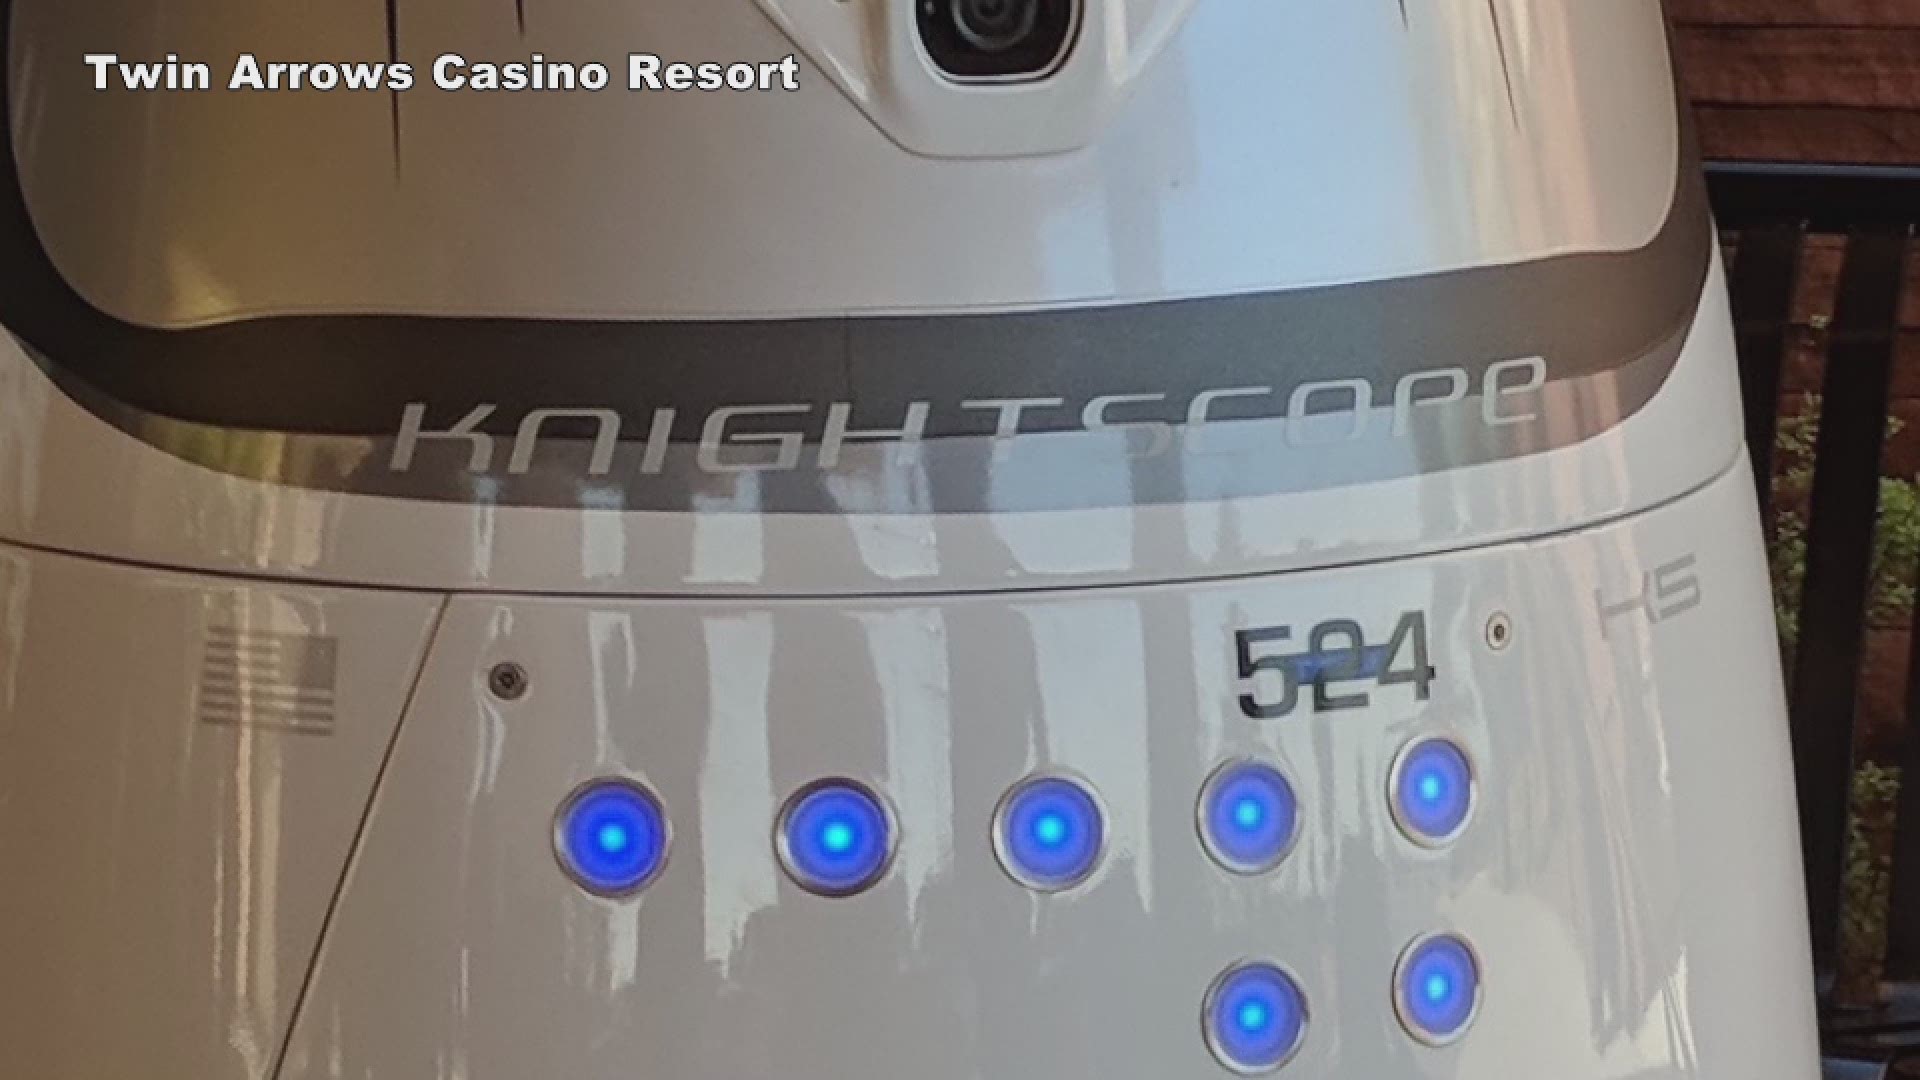 A casino is employing some robots to do mundane tasks that tied up their human counterparts. Check them out in action.